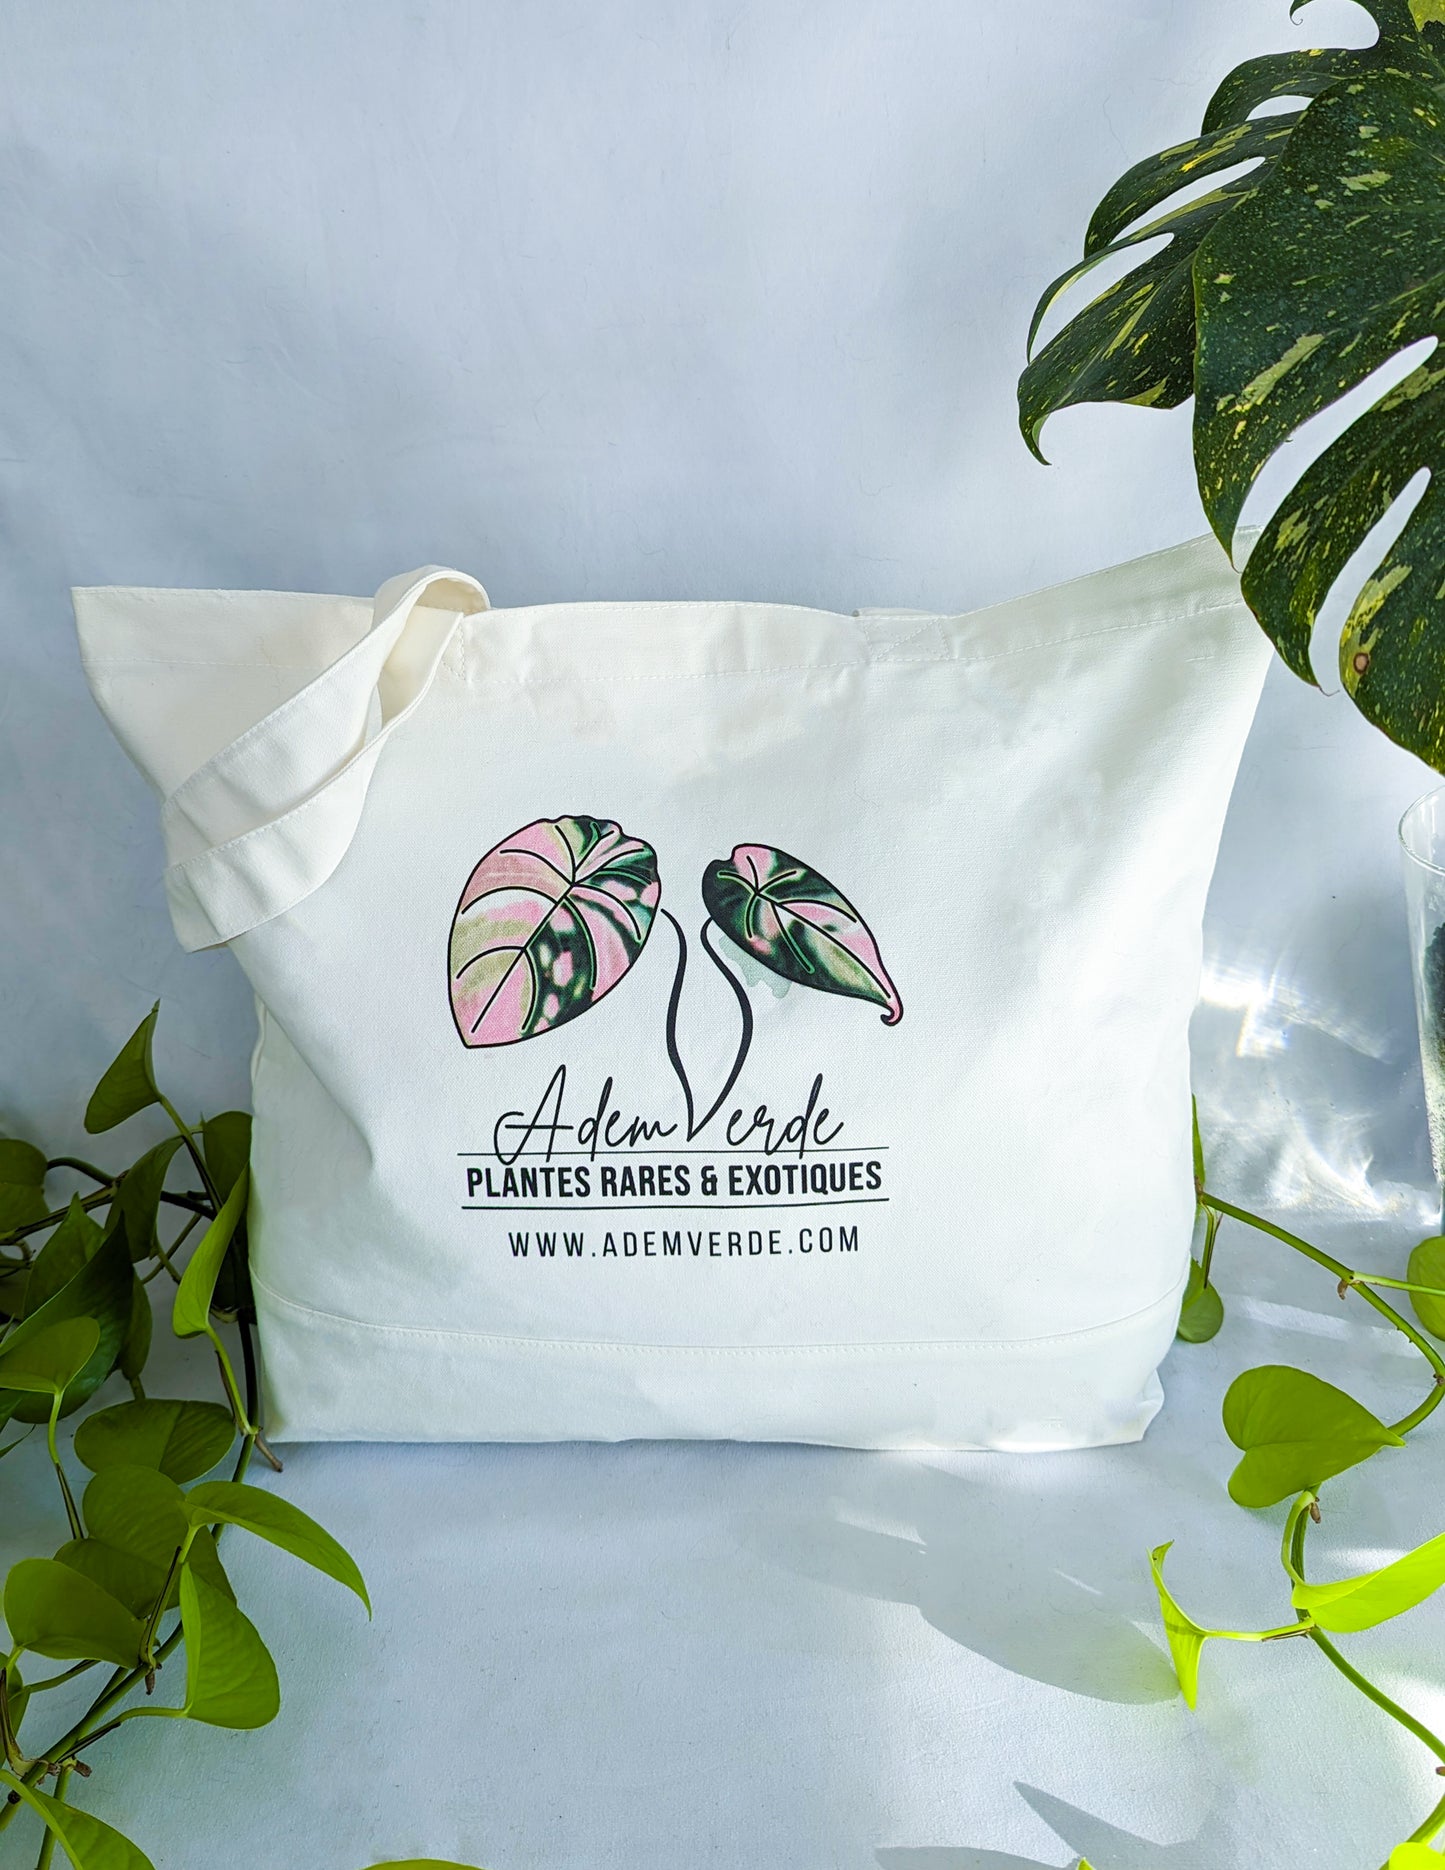 Tote Bags «Wherever life plants you, bloom with grace»